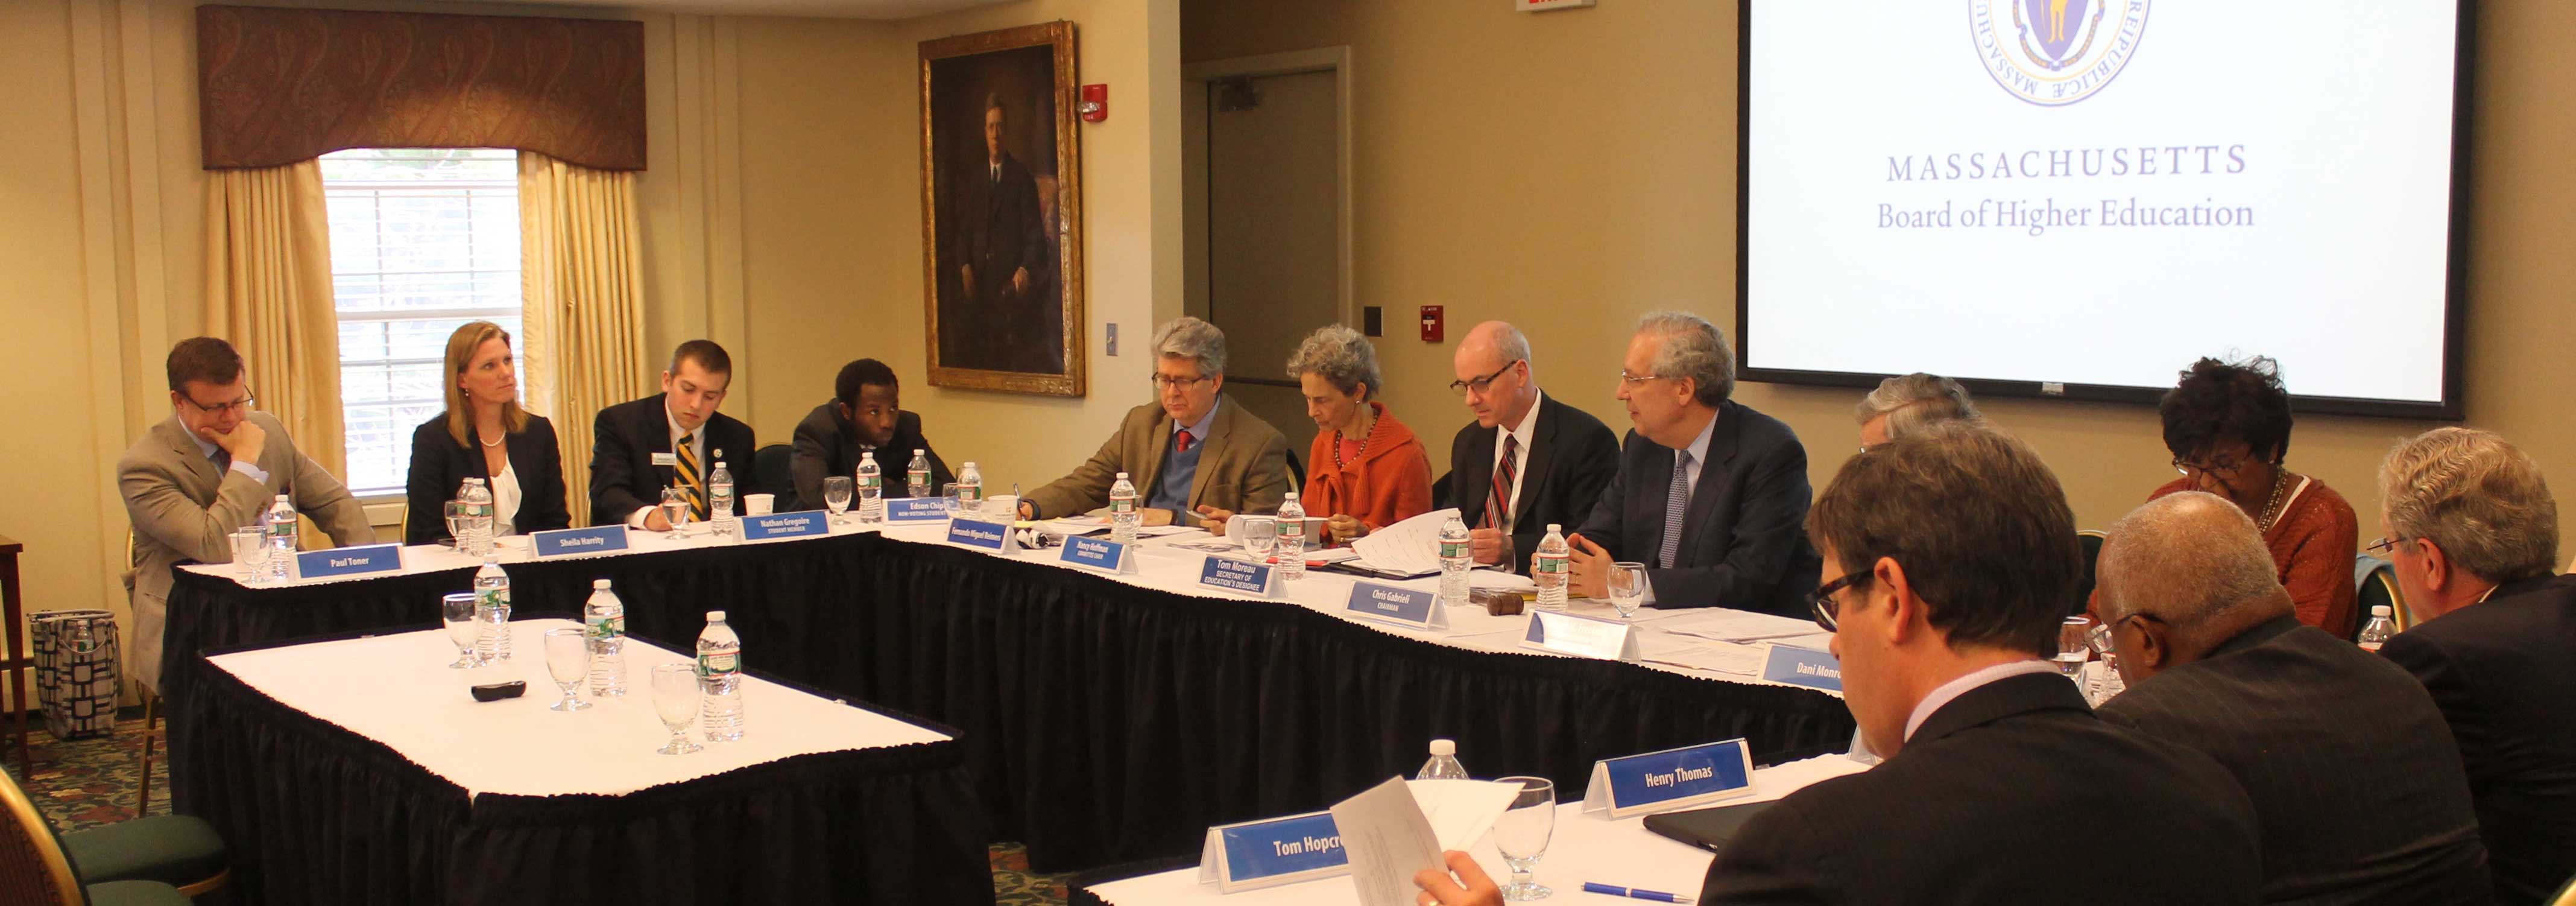 Board of Higher Education Meeting at Fitchburg State on April 28, 2015